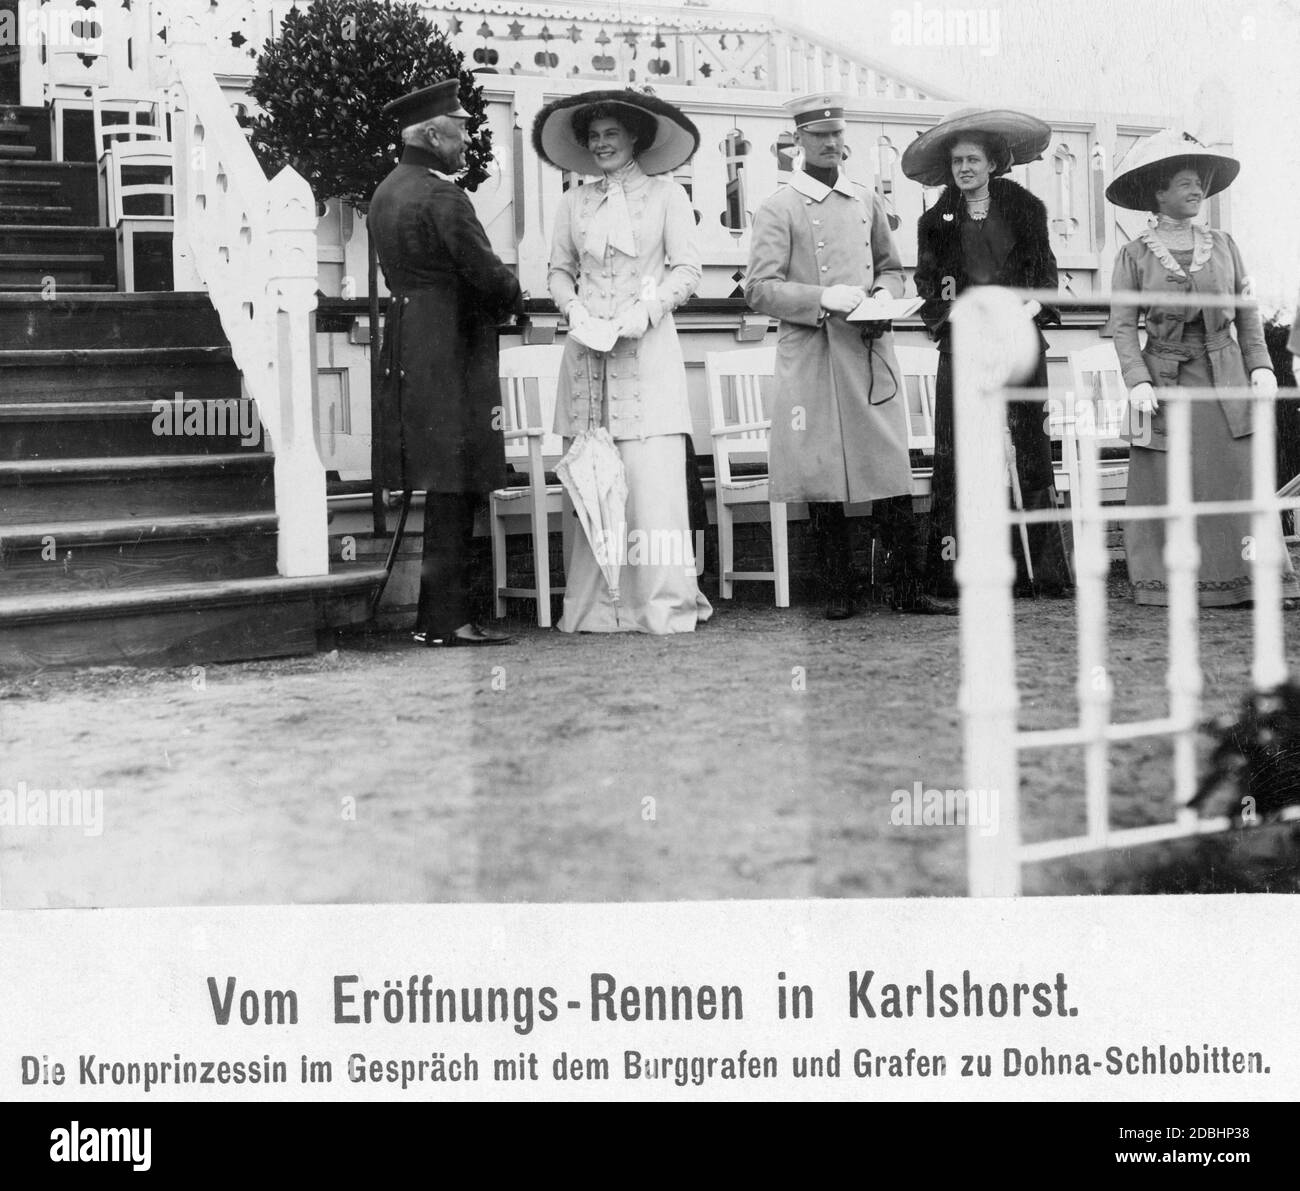 Alfred Graf and Burggraf zu Dohna-Schlobitten (left) talking to Crown Princess Cecilie of Mecklenburg (right). They are standing in front of the grandstand of the trotting track in Karlshorst in Berlin, waiting for the opening race in 1911. Stock Photo